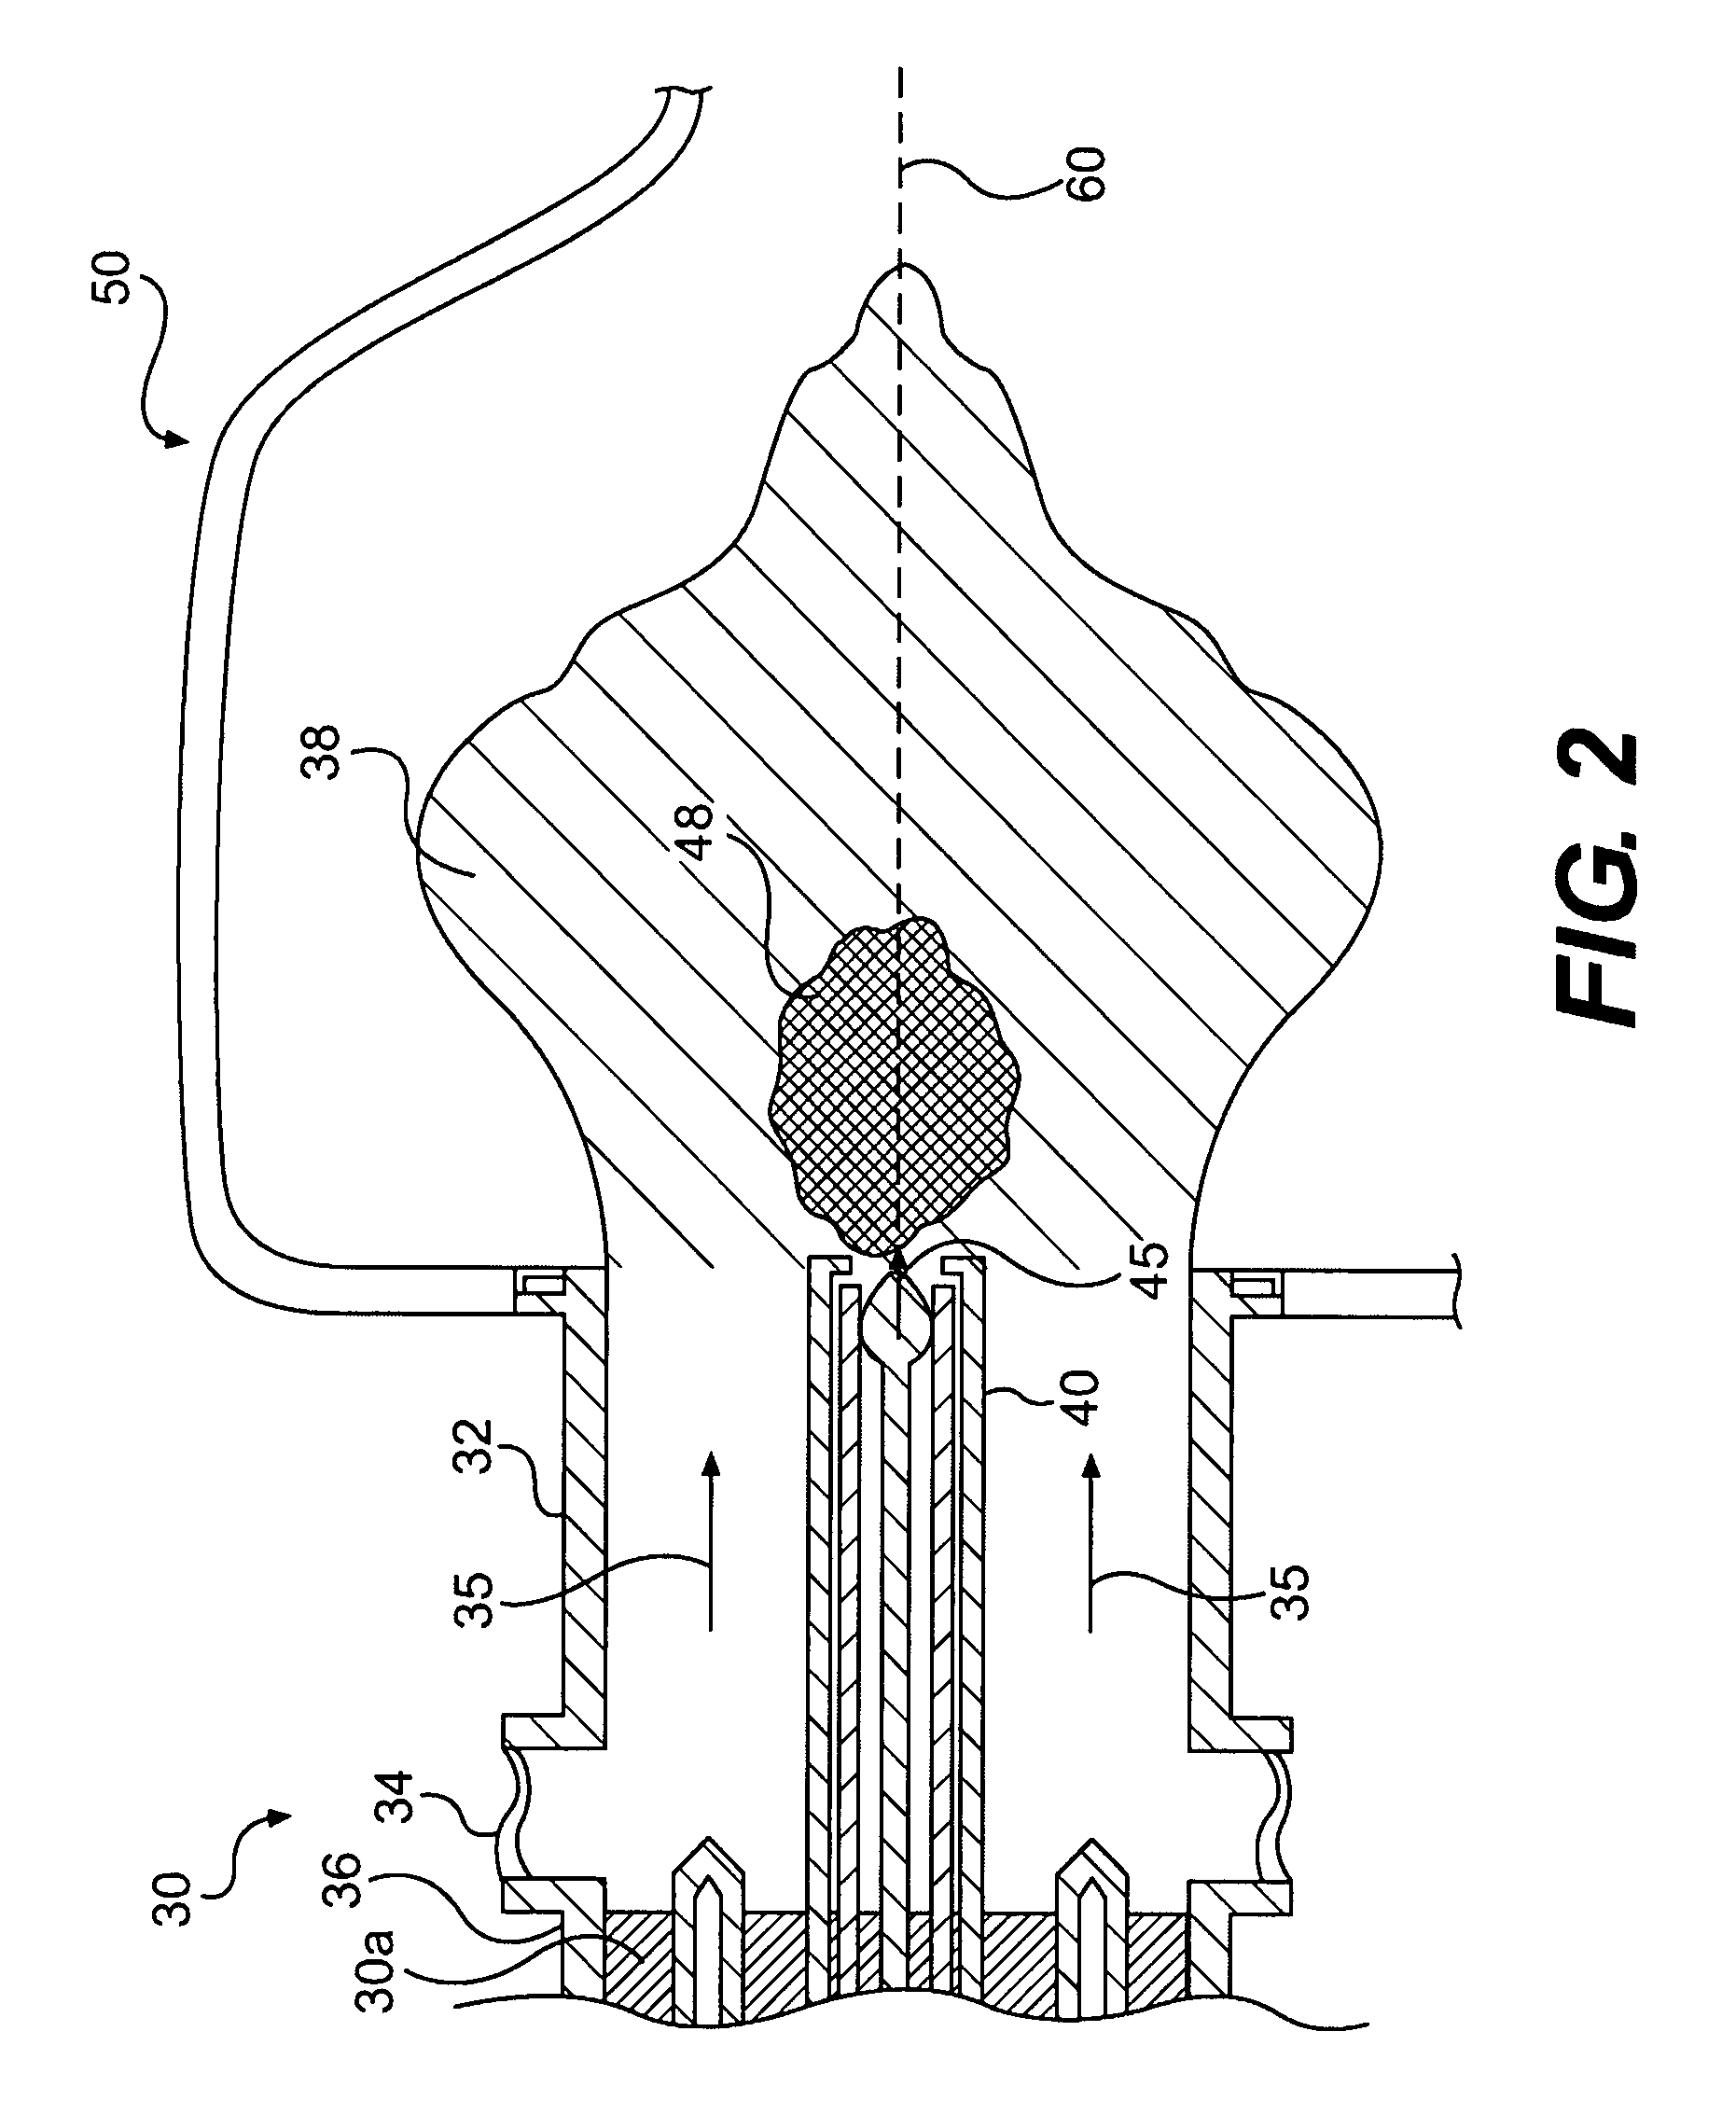 Active combustion control for a turbine engine